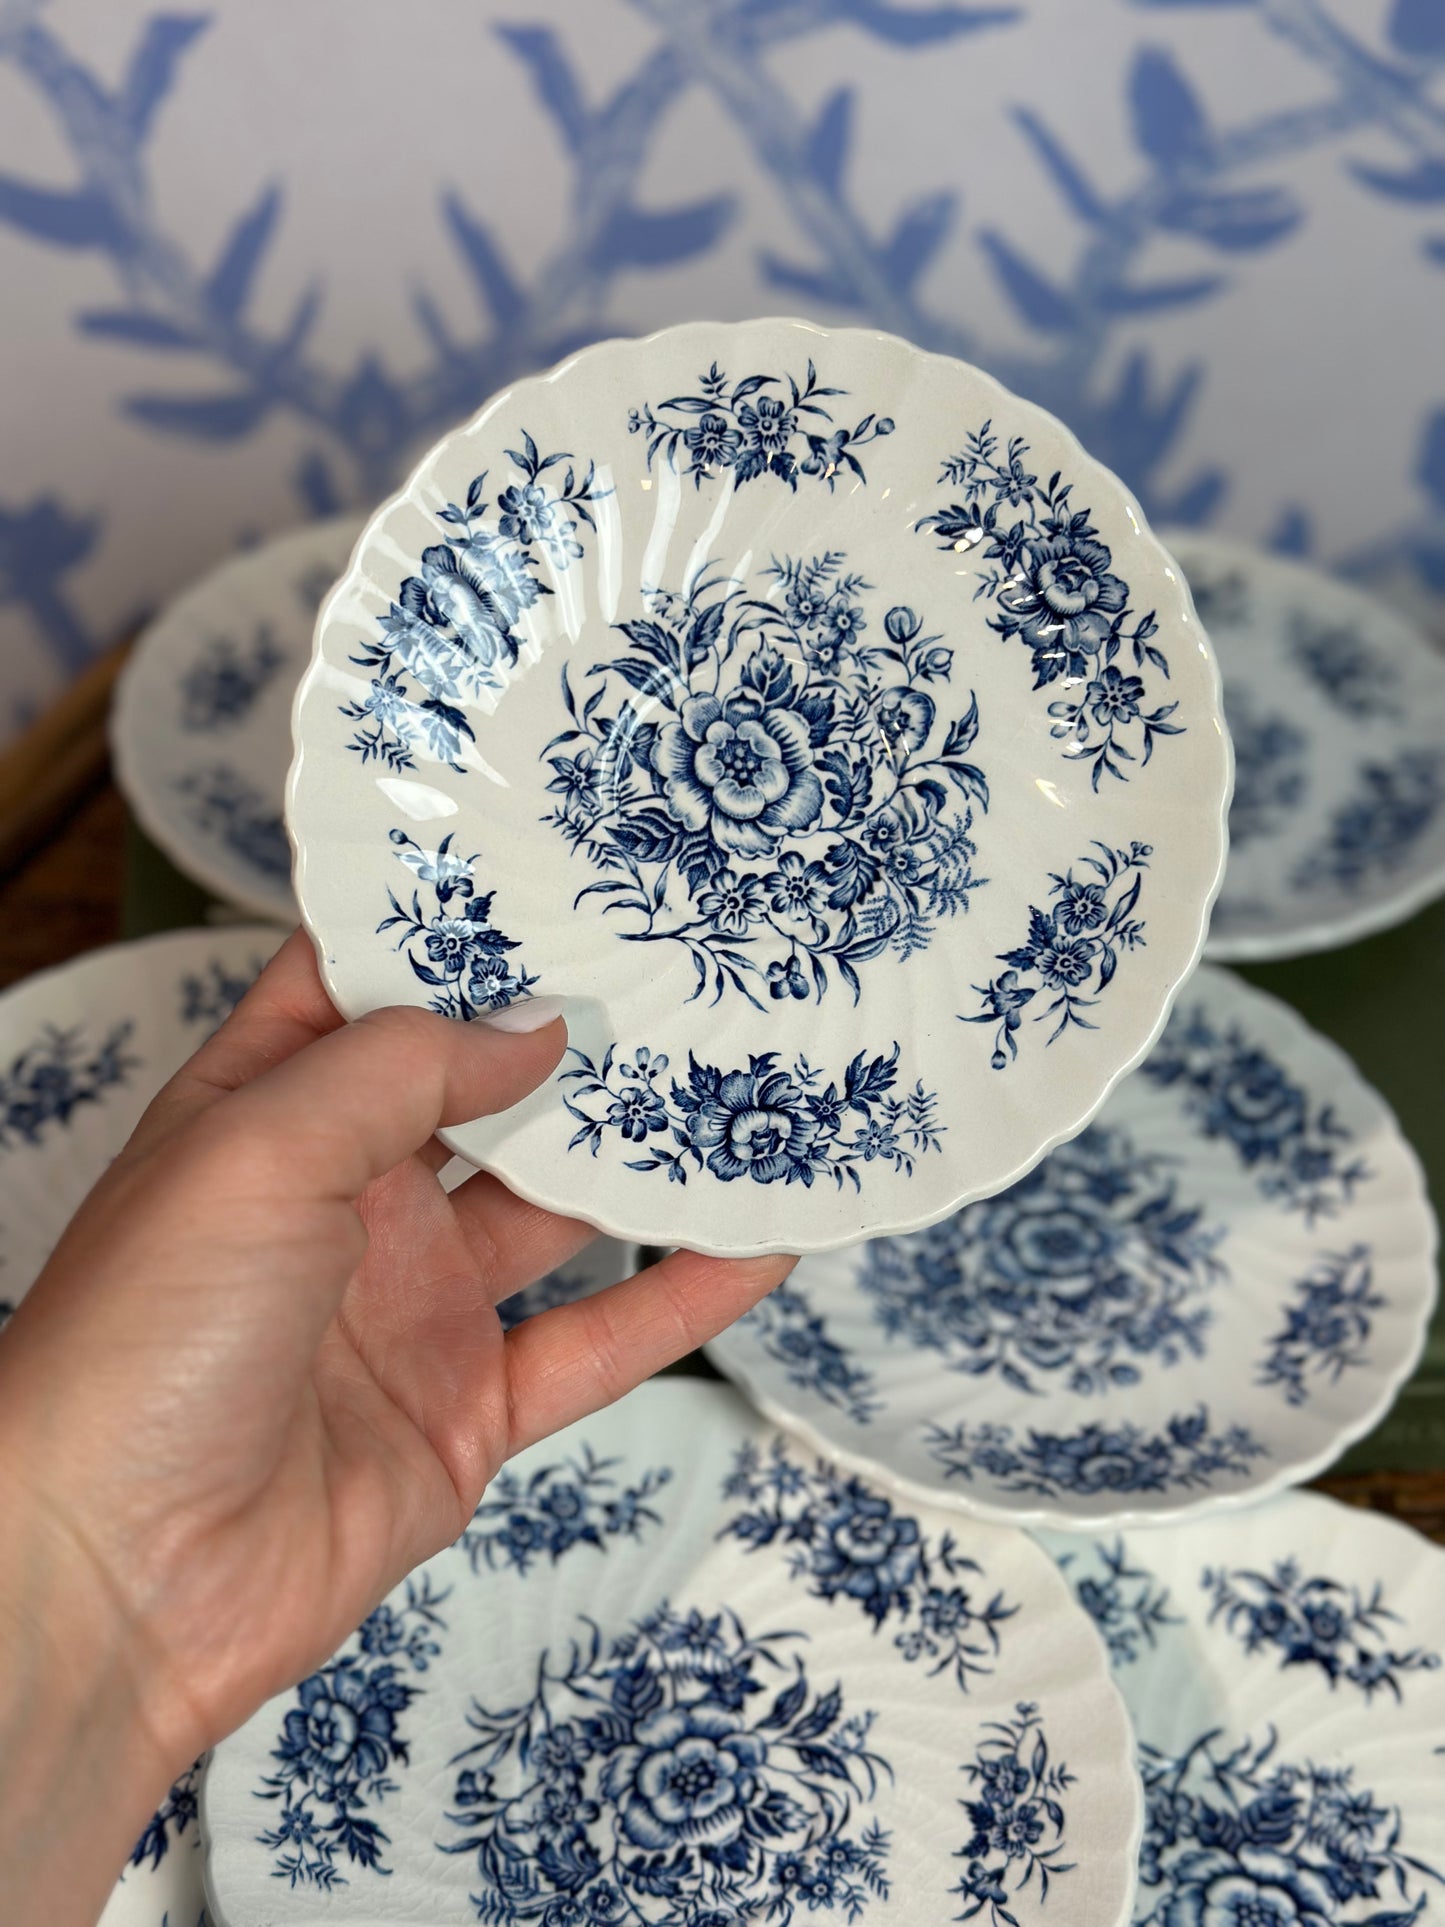 Vintage Blue & White Floral Saucers "Beacon Hill" Staffordshire, England (sold separate)